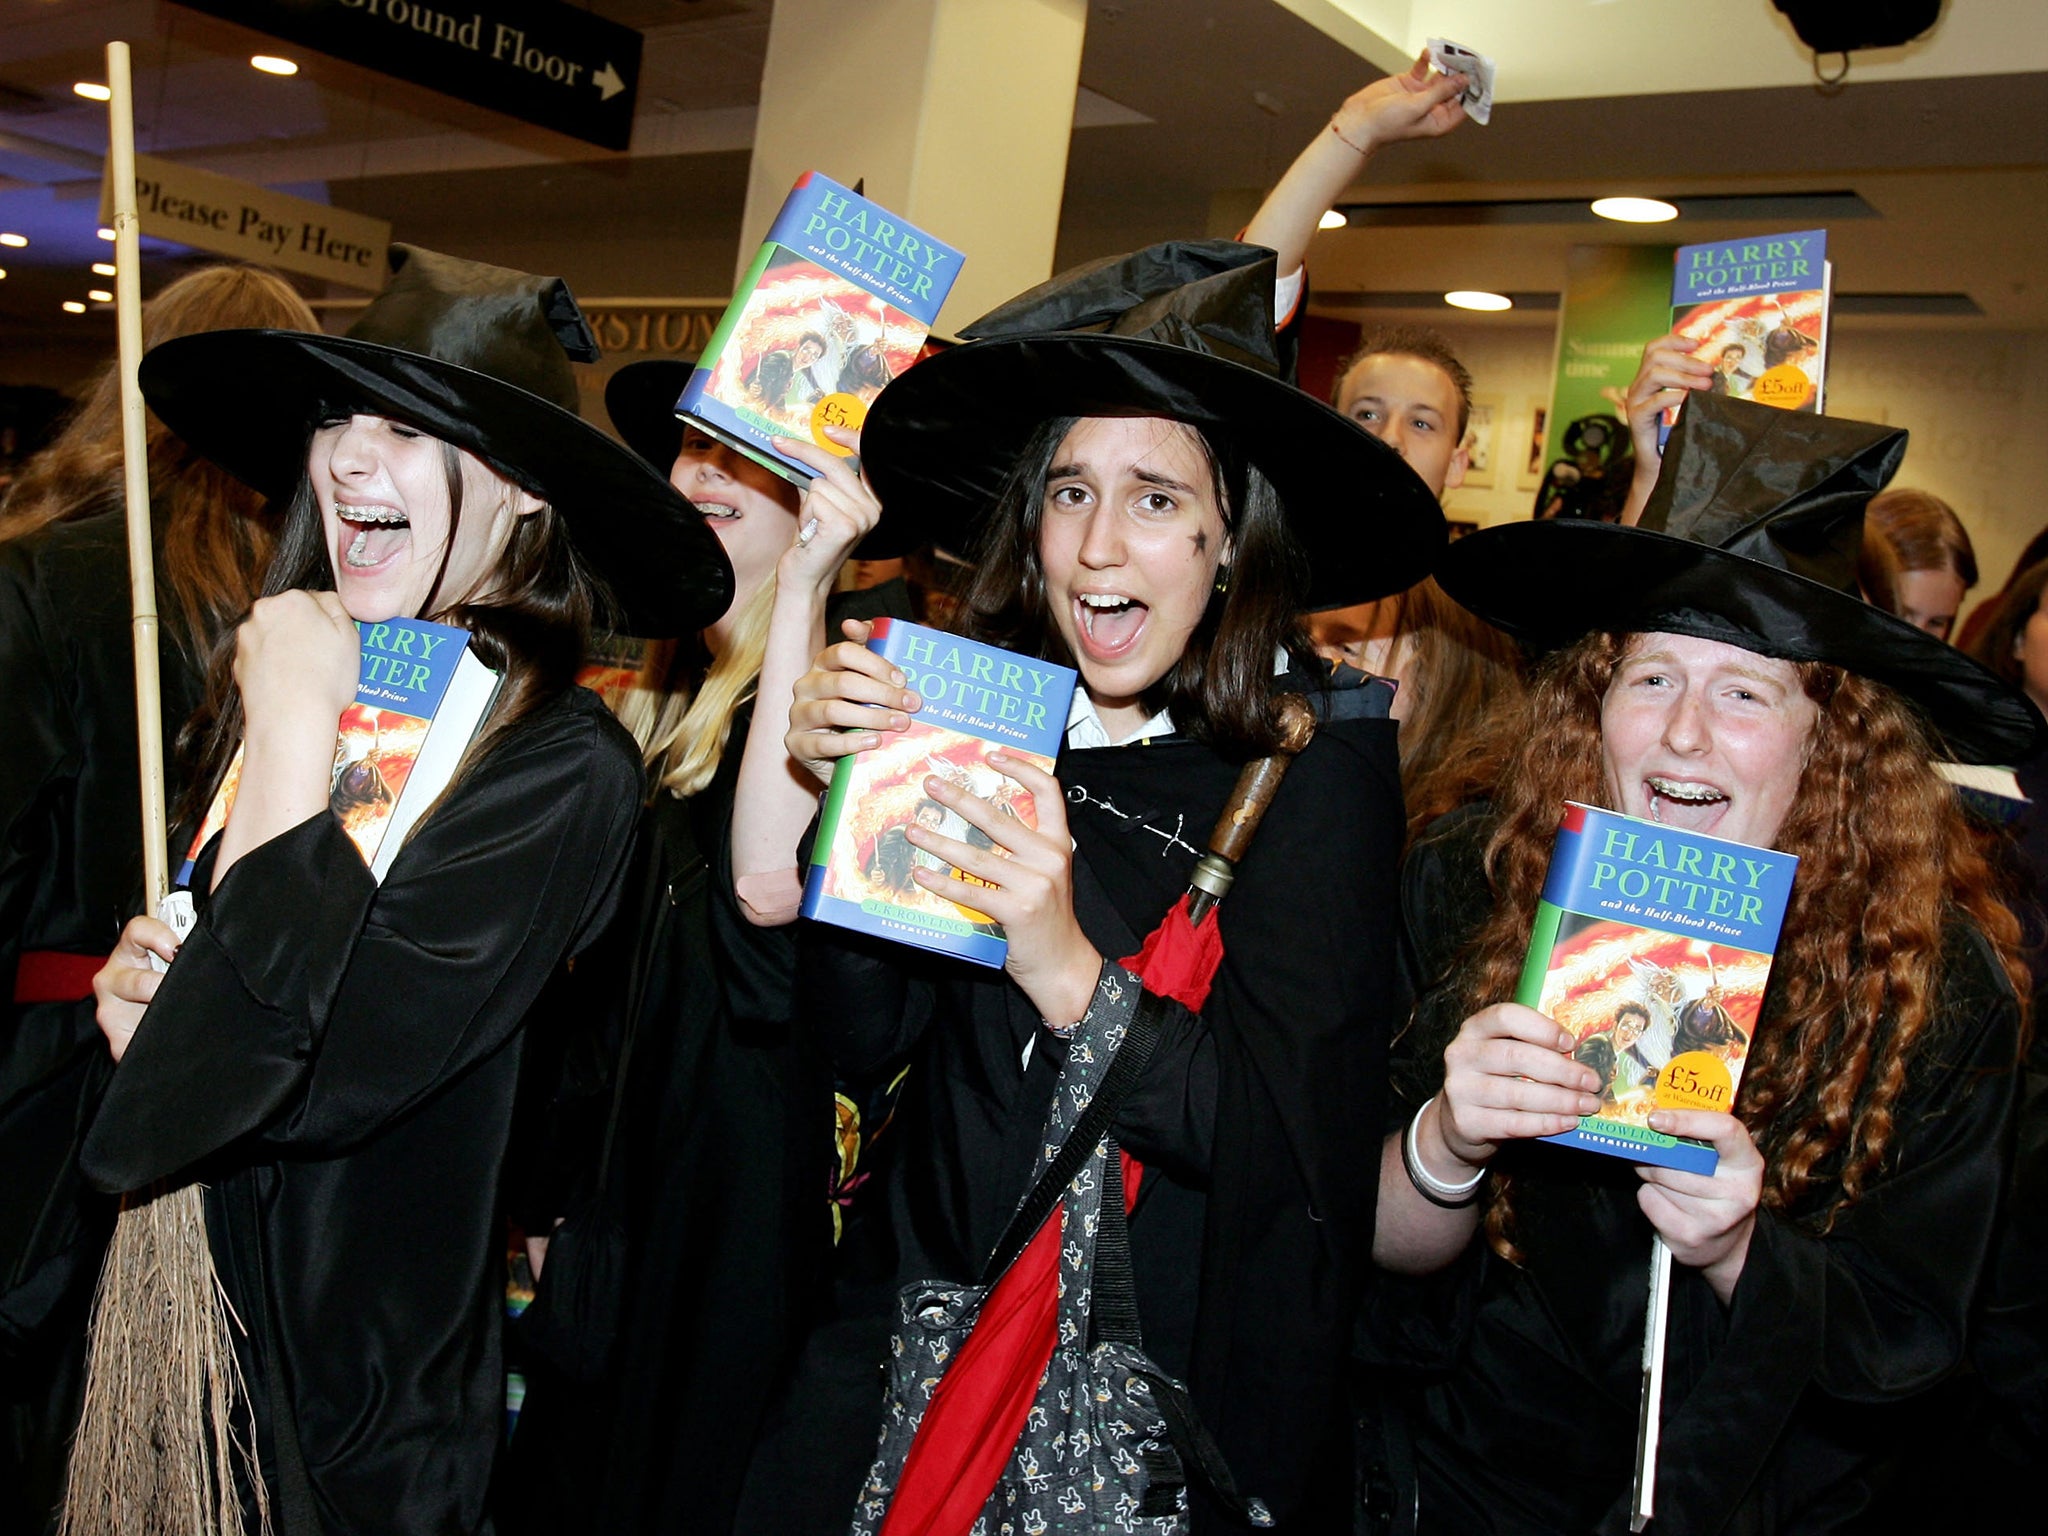 Harry Potter fans pick up fresh copies of ‘The Half-Blood Prince’ at a midnight opening in London in 2005